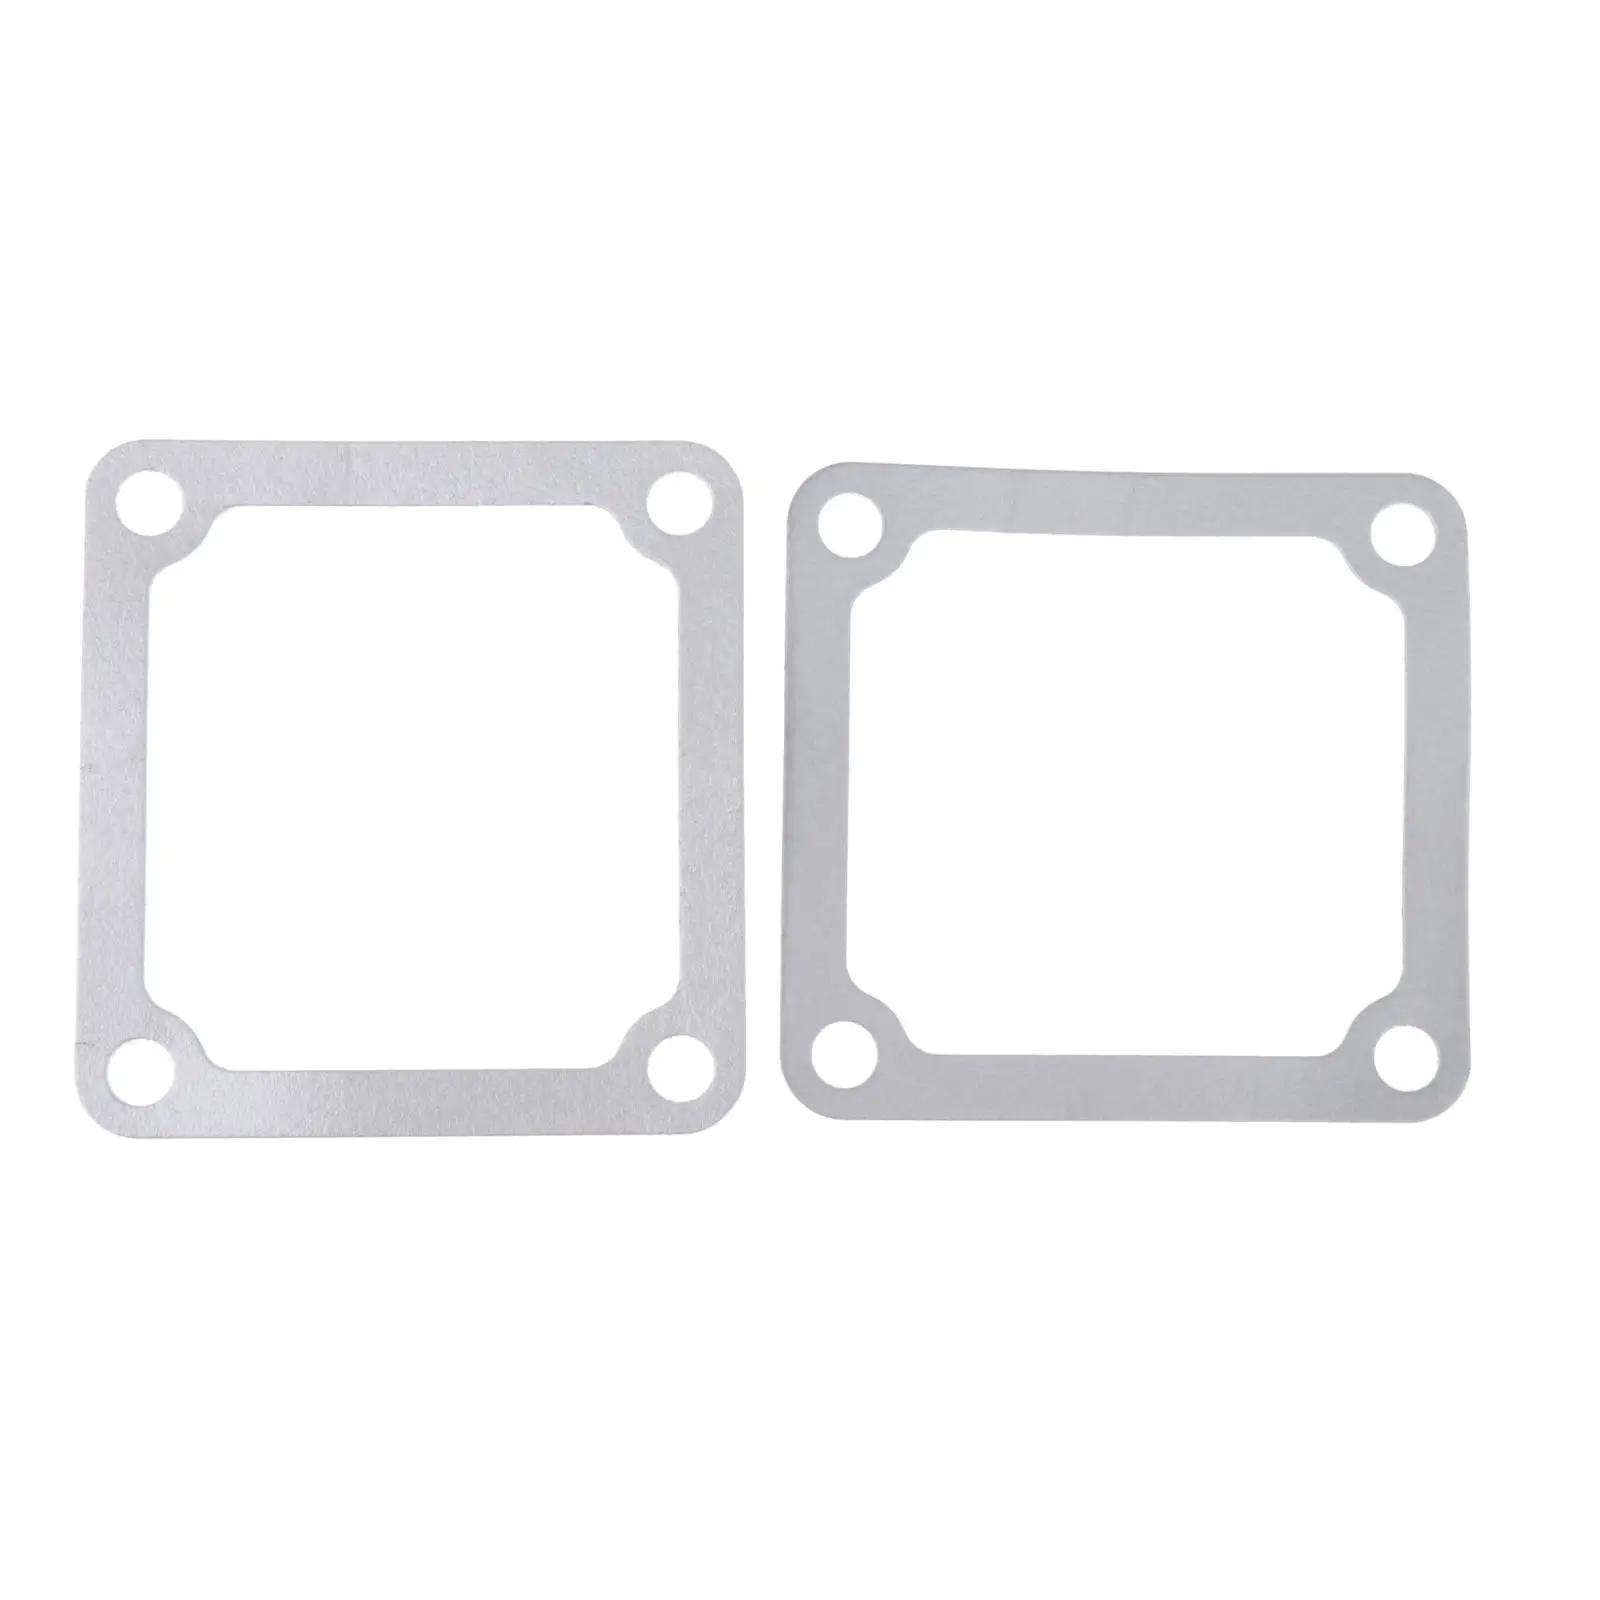 2x Intake Heater Grid Gaskets Professional for 5.9L 93x98mm Automobile Easy to